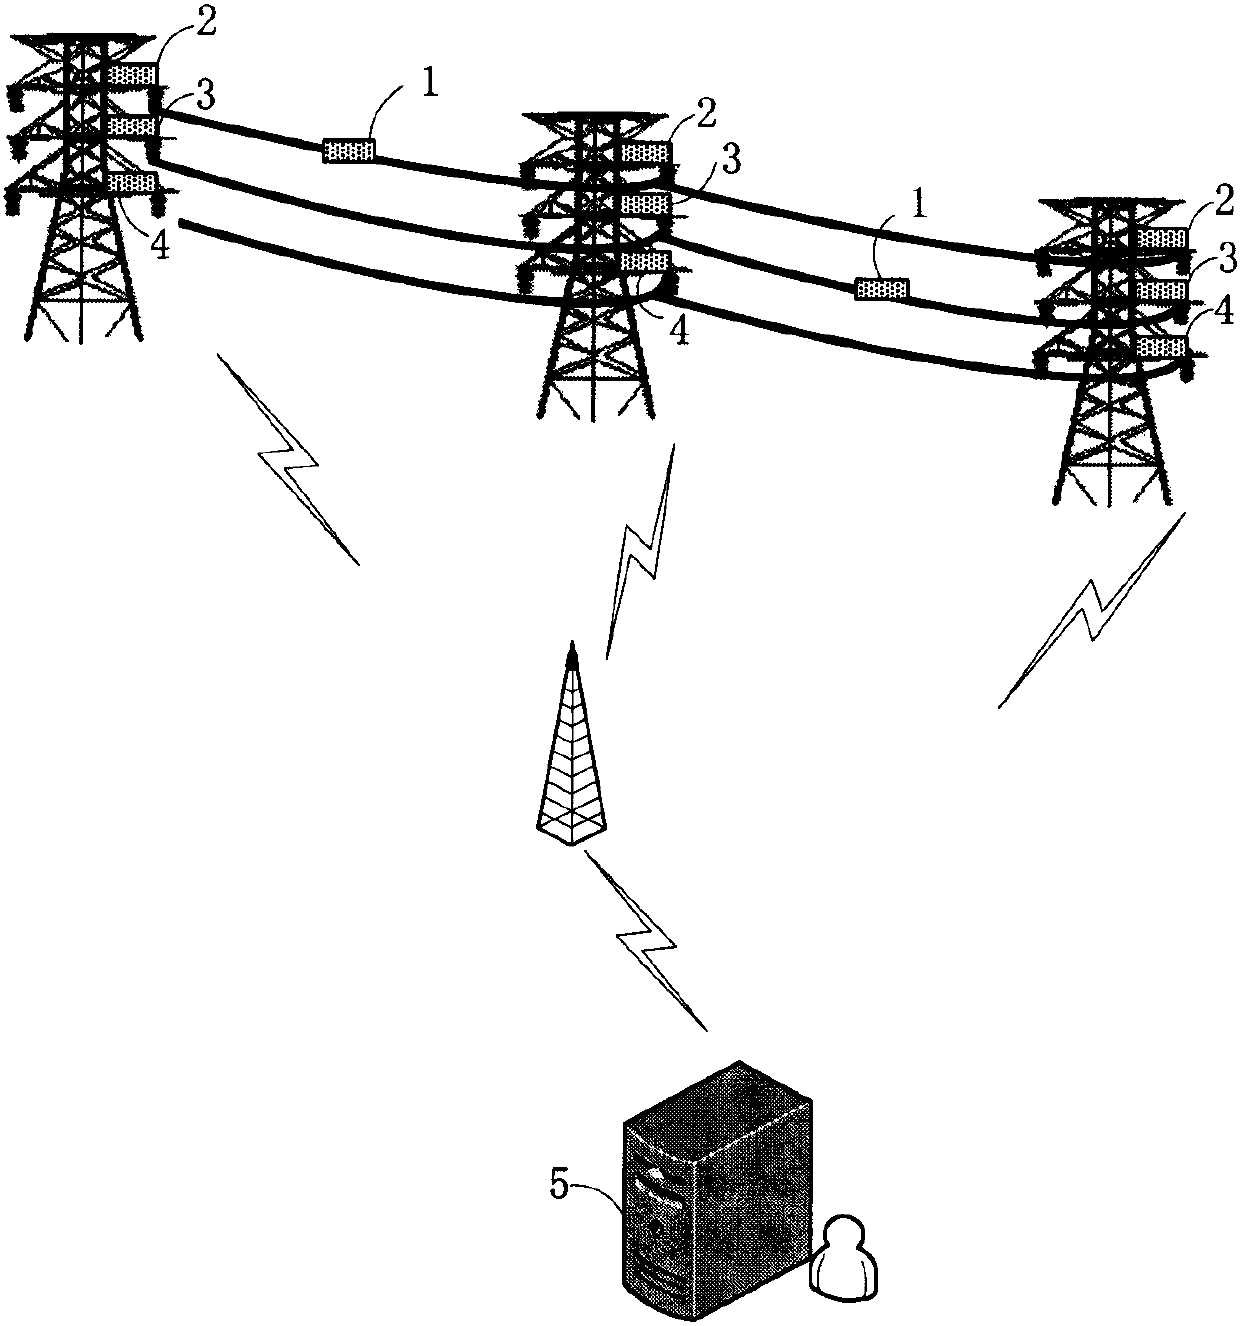 Online monitoring and early warning system for galloping of power transmission line